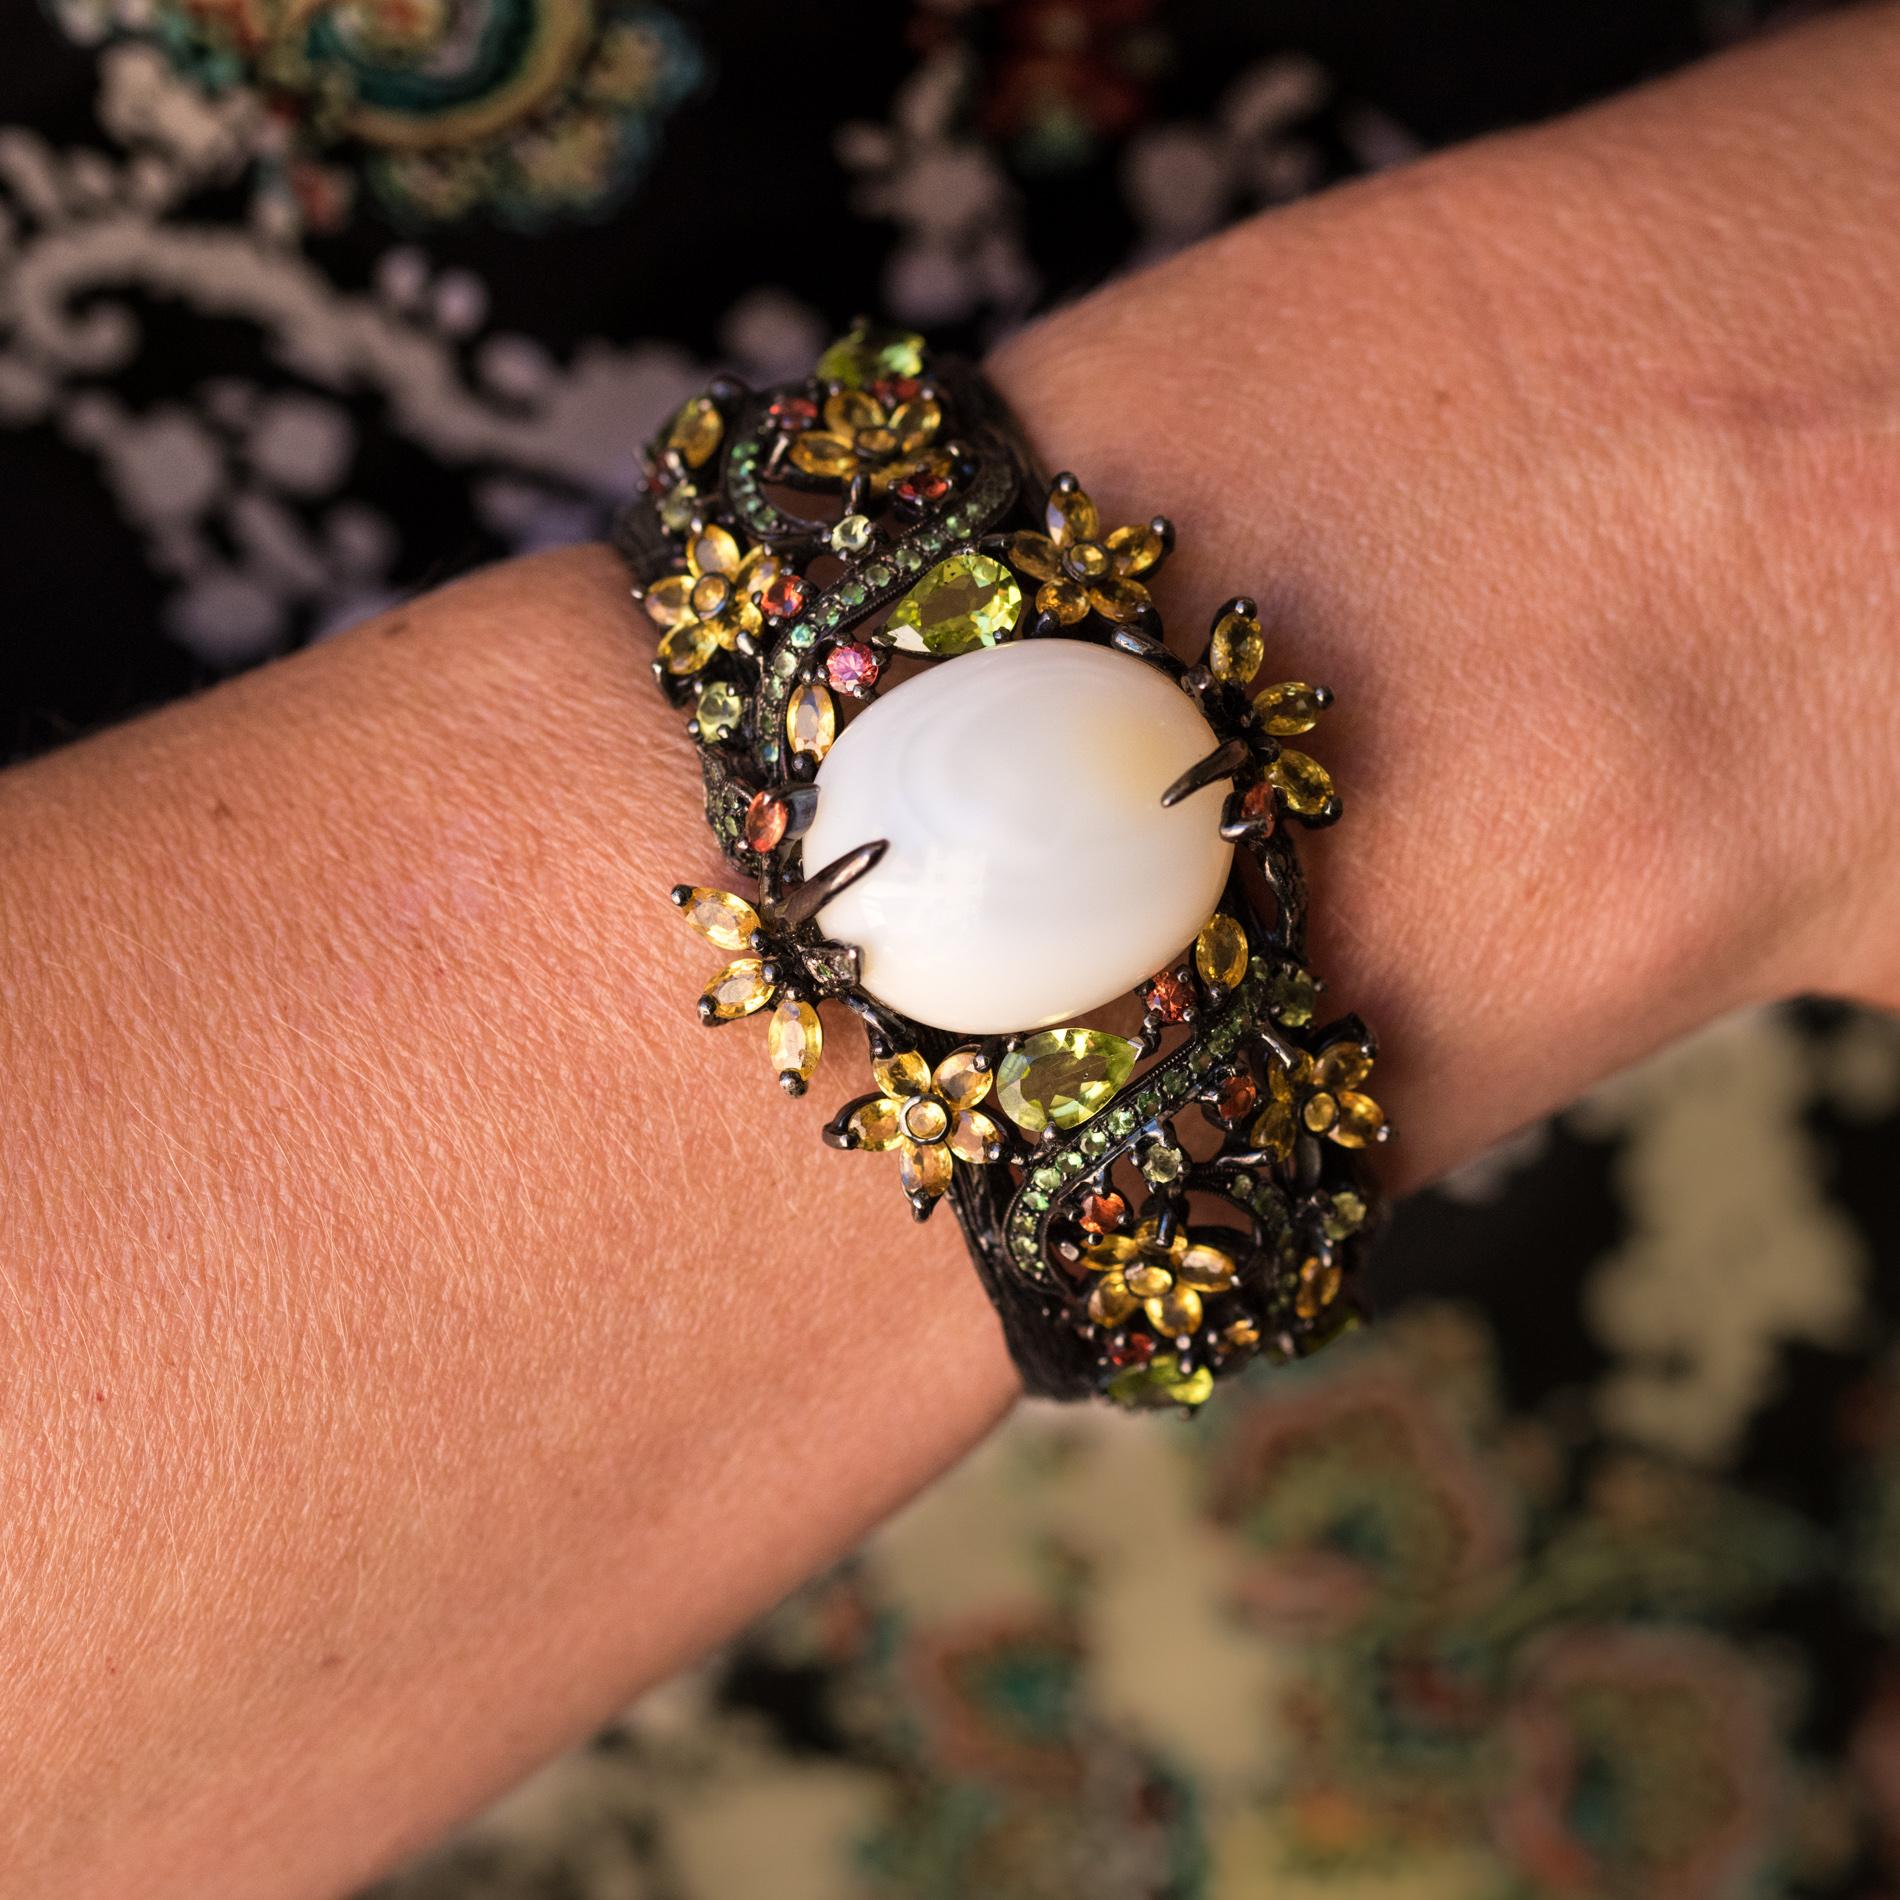 Bracelet in silver, black rhodium.
Impressive cuff, this bracelet is set on its top with a common white cabochon opal. The whole bracelet is openwork and represents a decor of branches, leaves and flowers set with peridots, green tsavorite garnets,